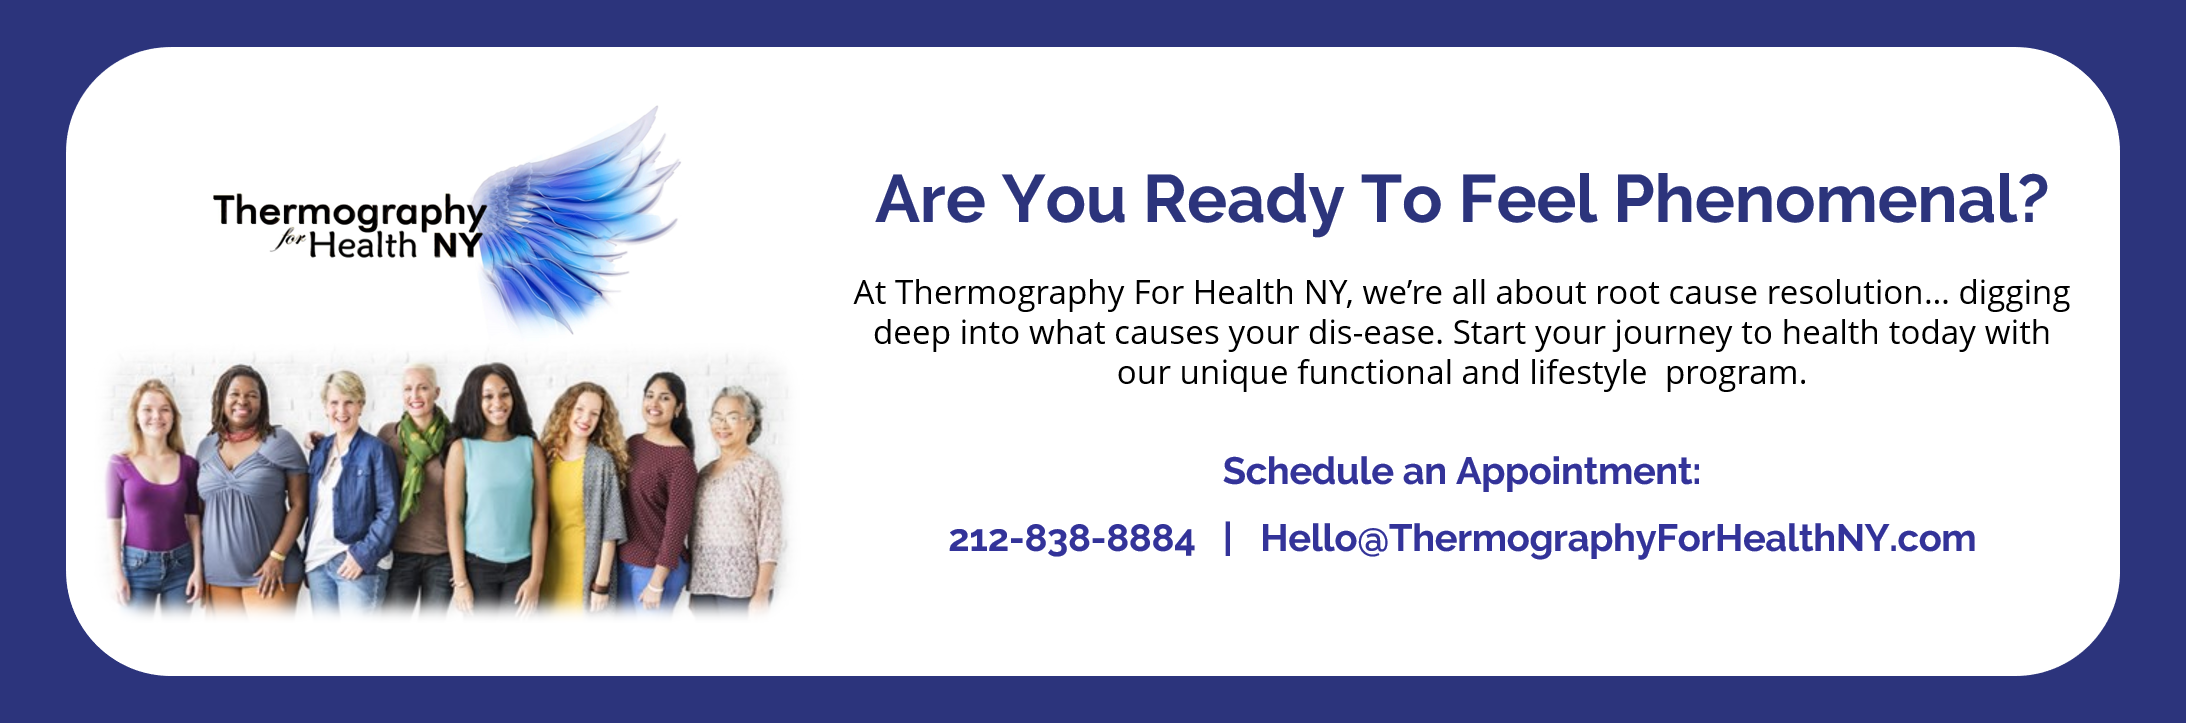 Thermography For Health New York reviews | 120 E 56th St. - New York NY